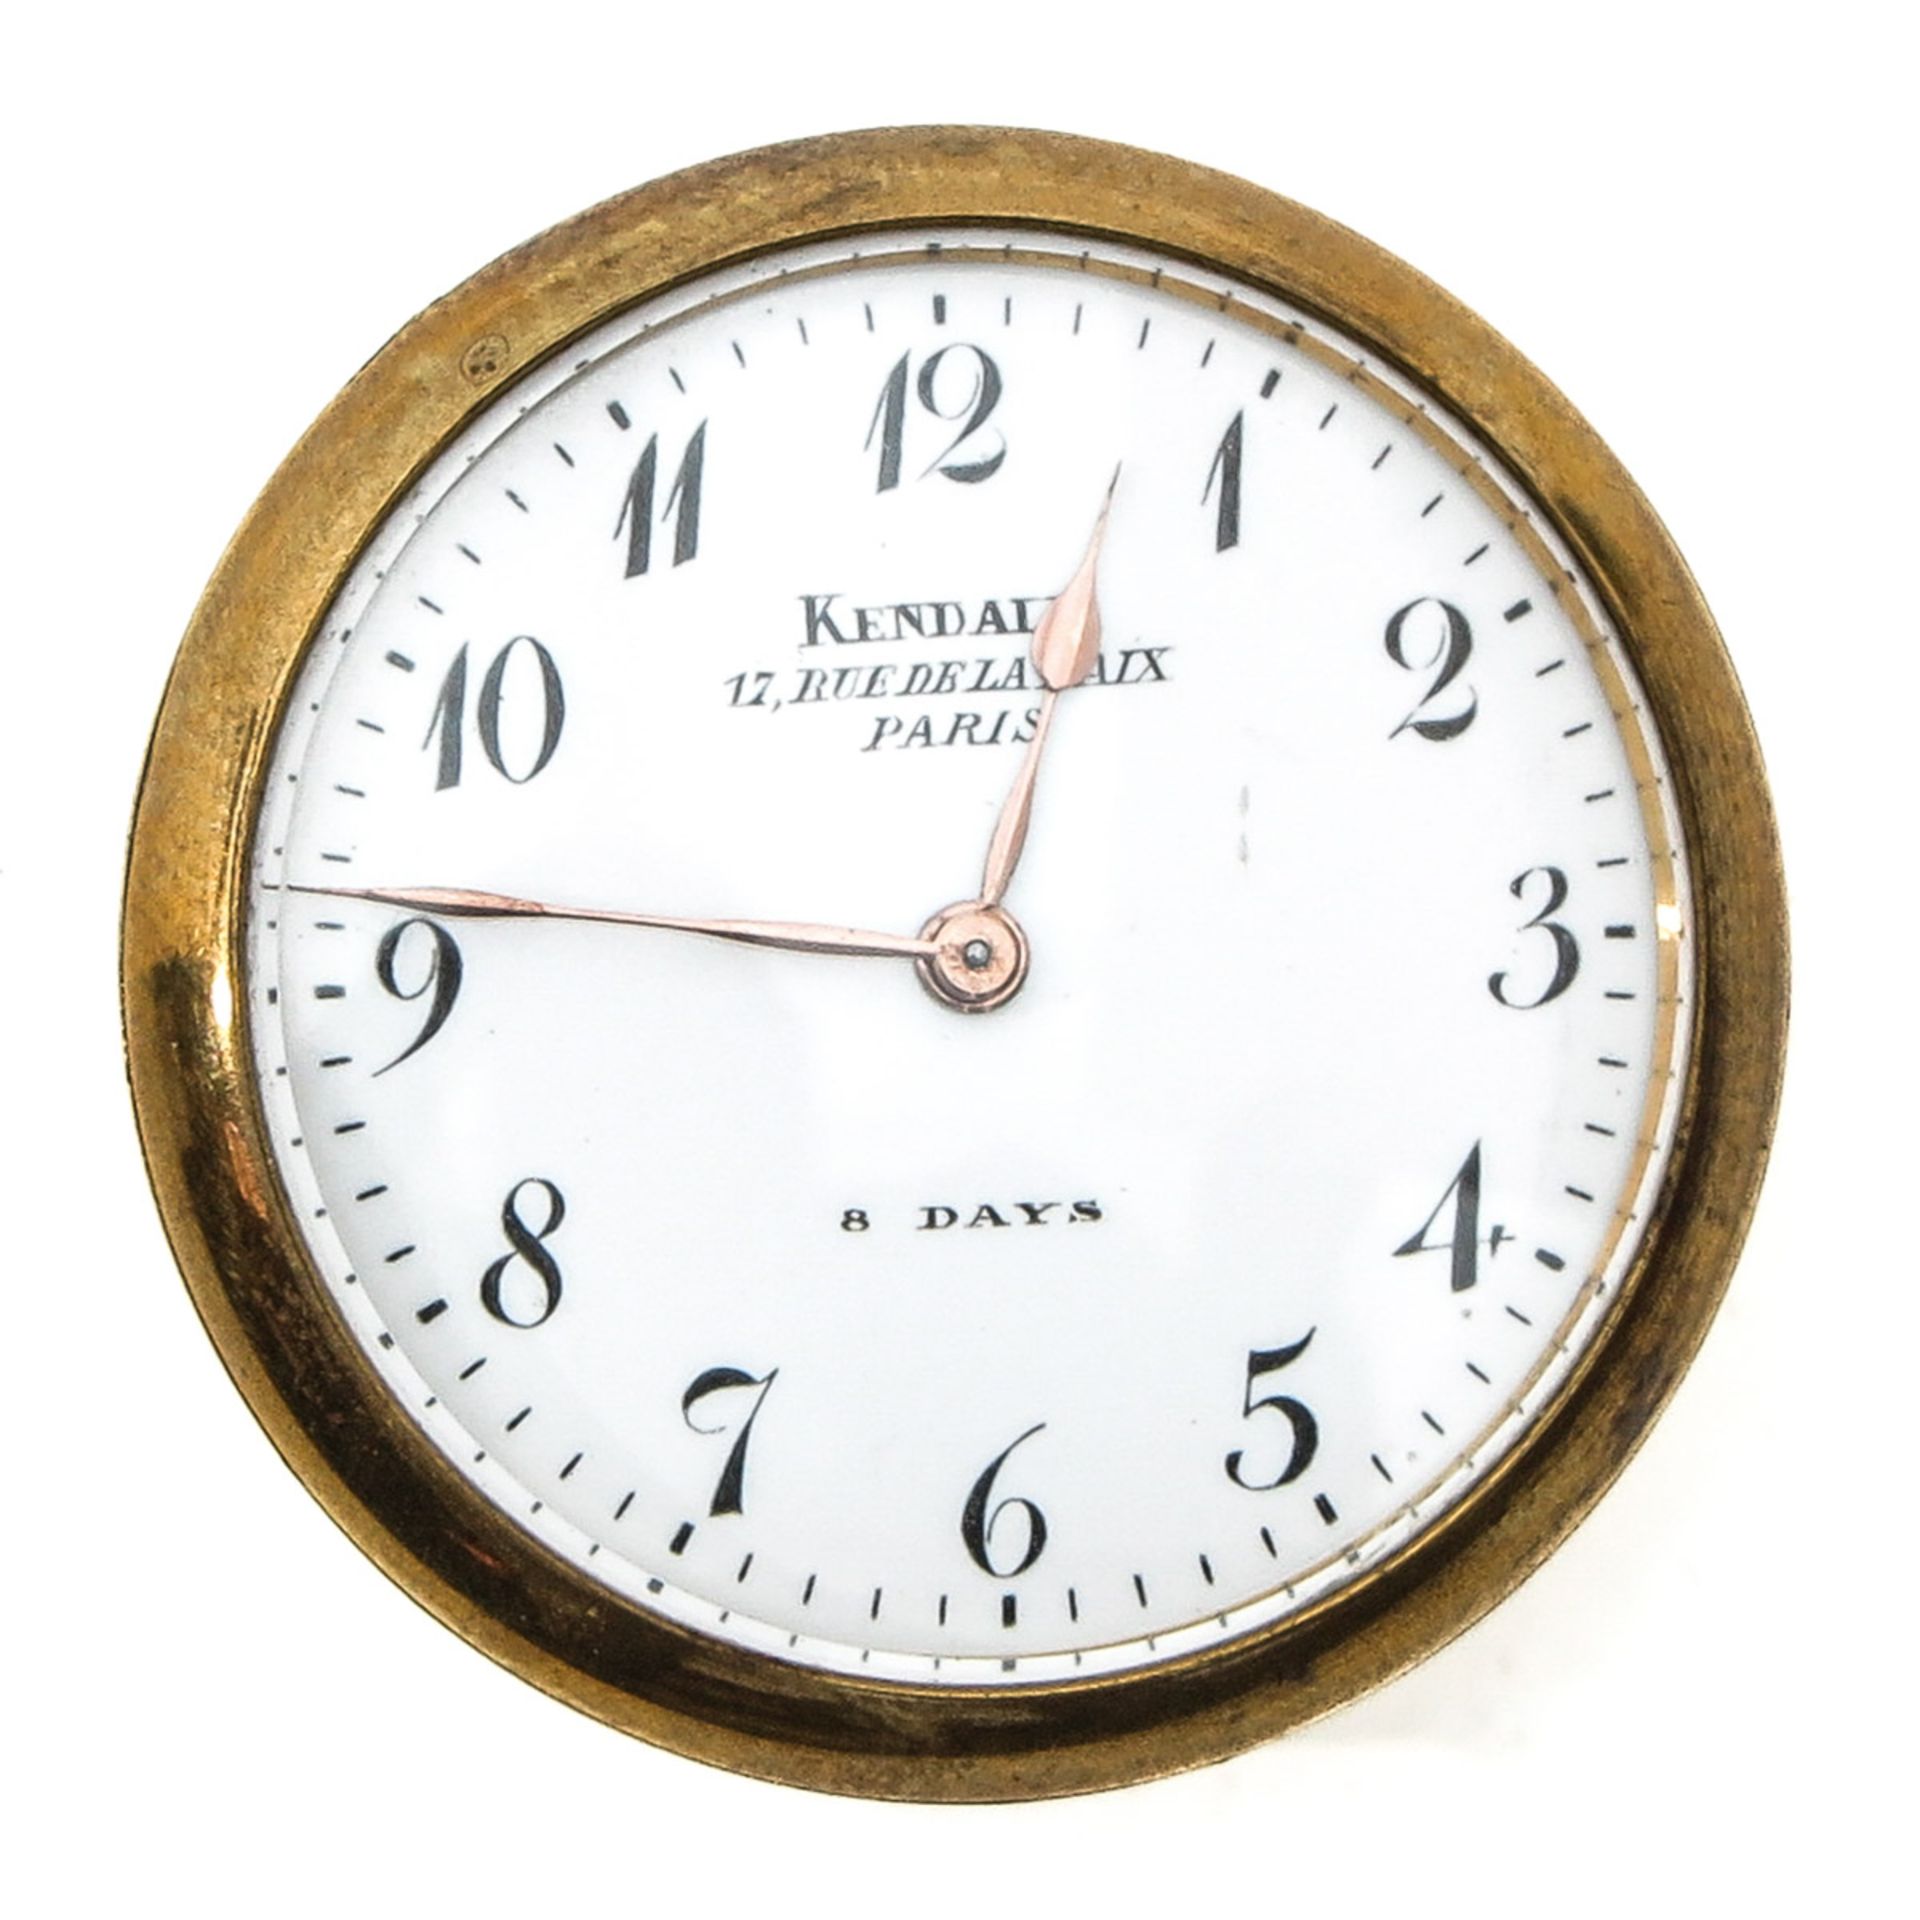 A Travel Clock Signed Kendall Paris - Image 4 of 8